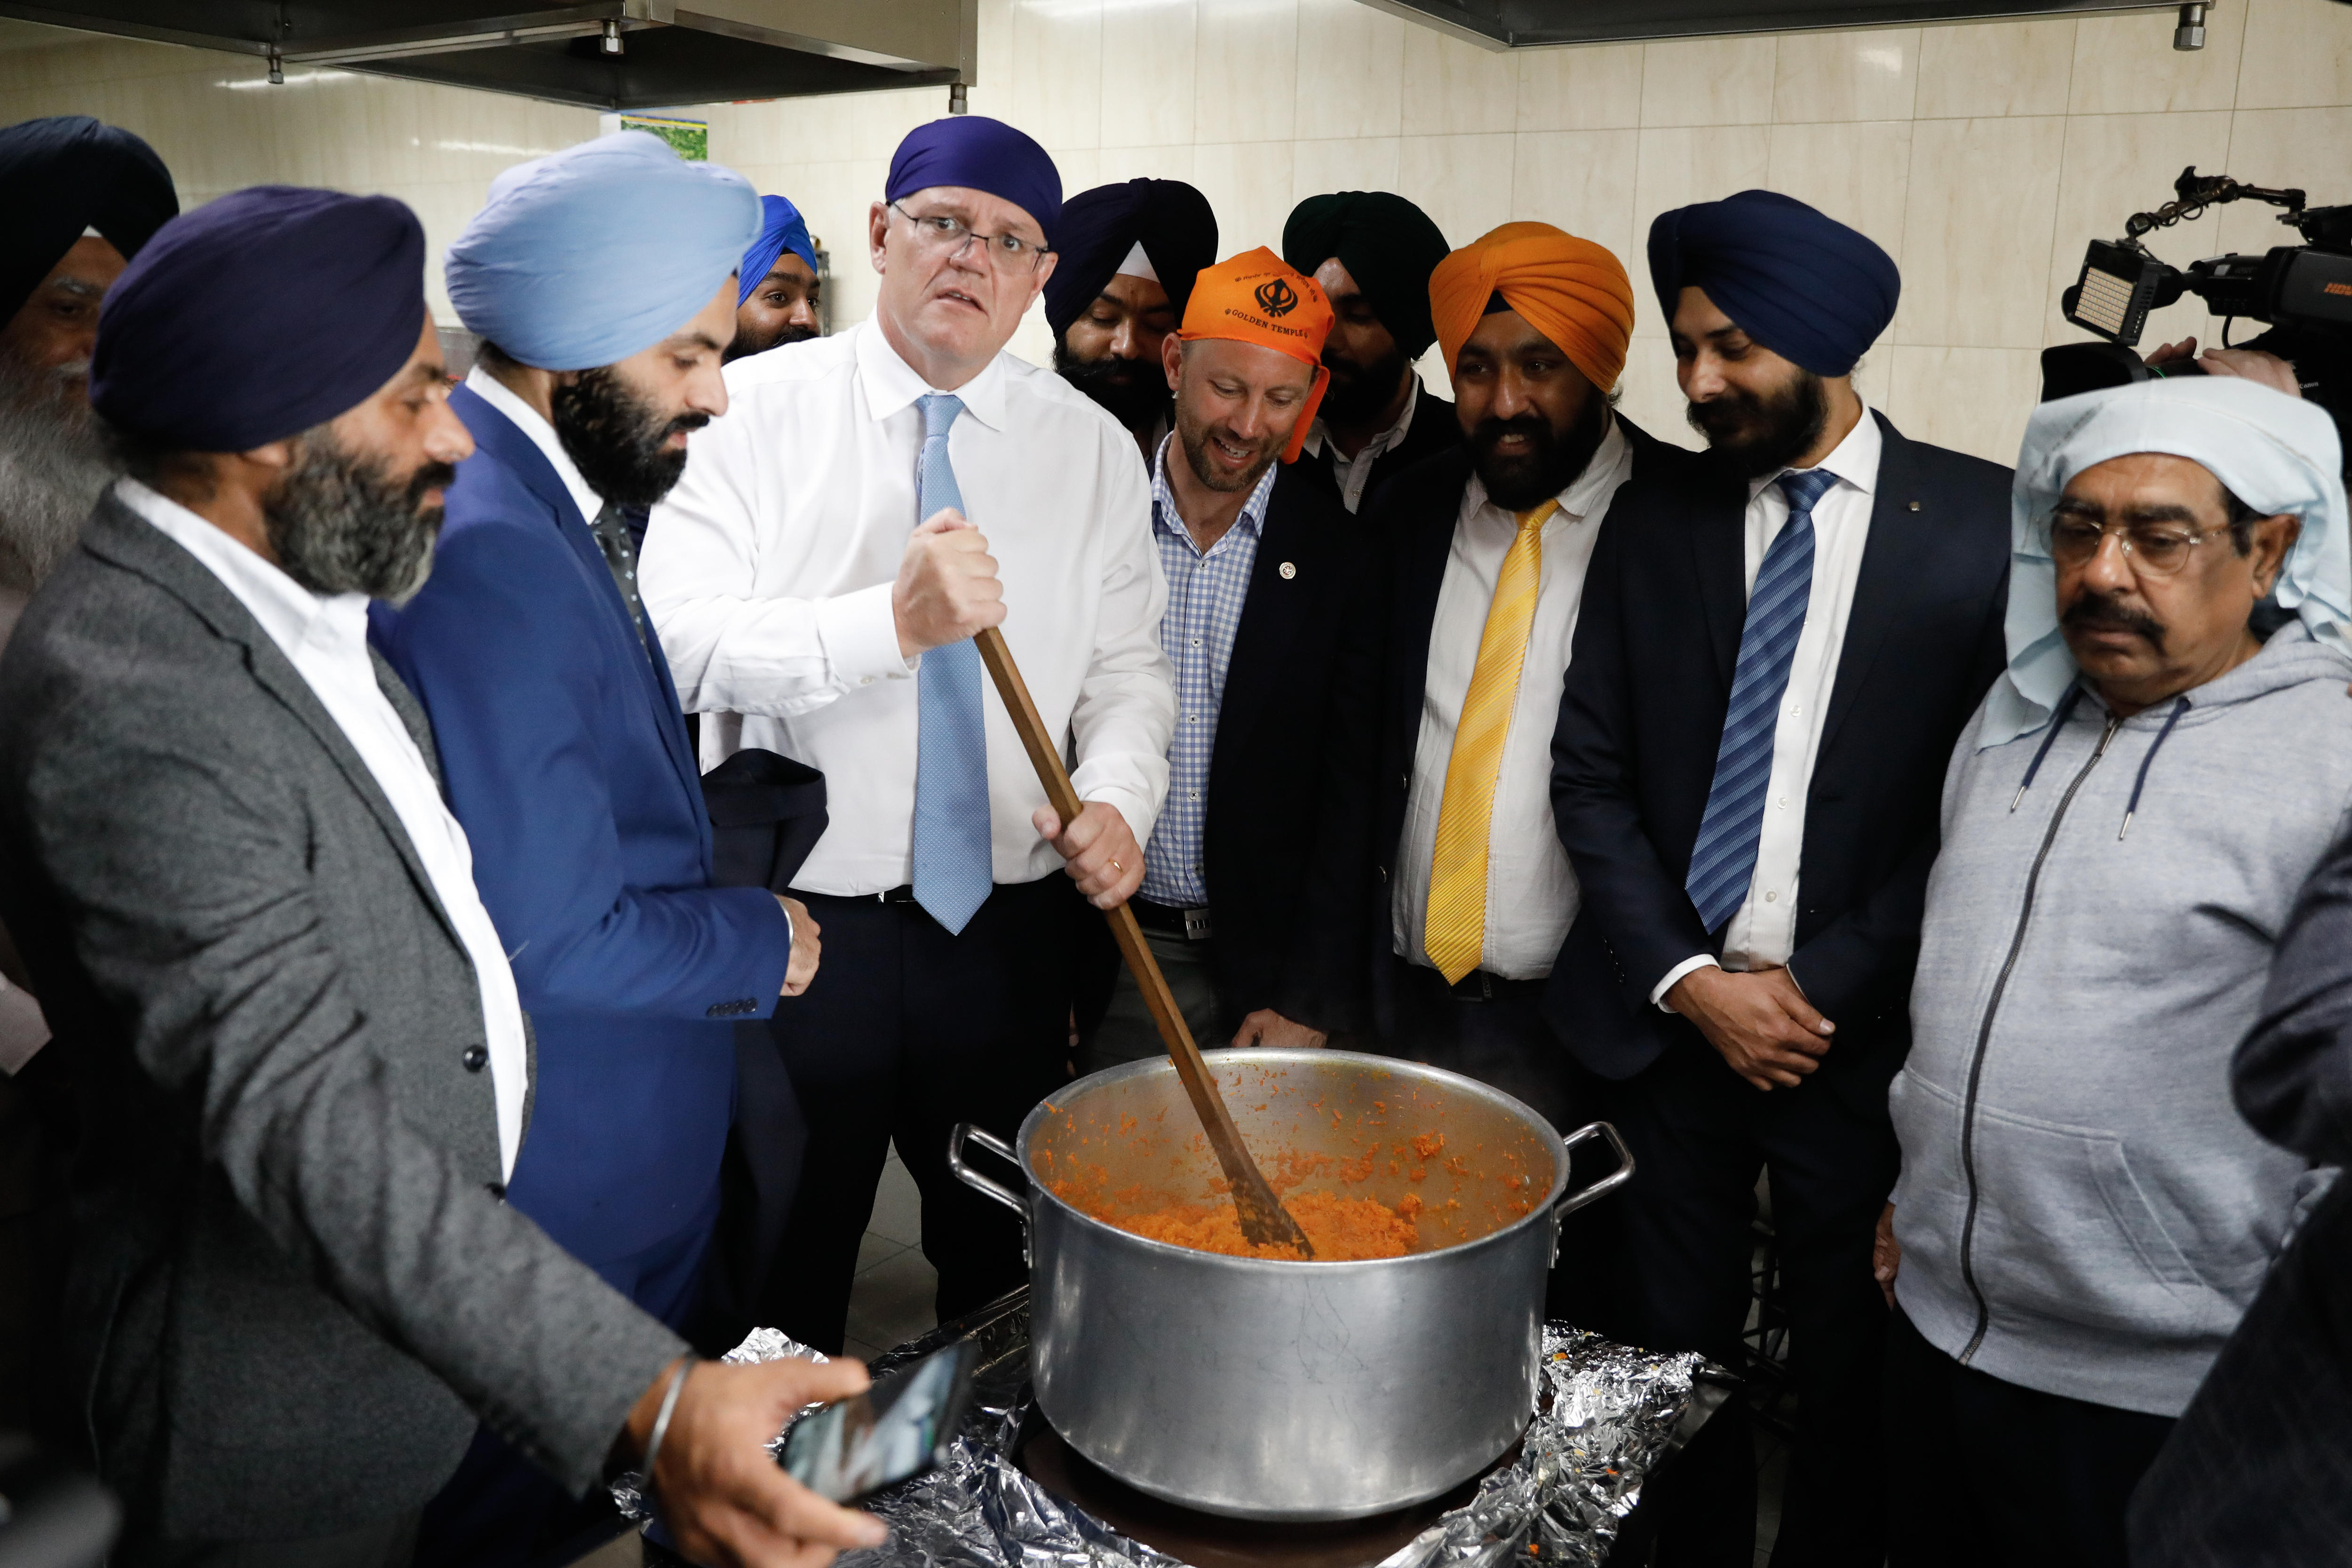 A man cooking rice surrounded by Sikh men